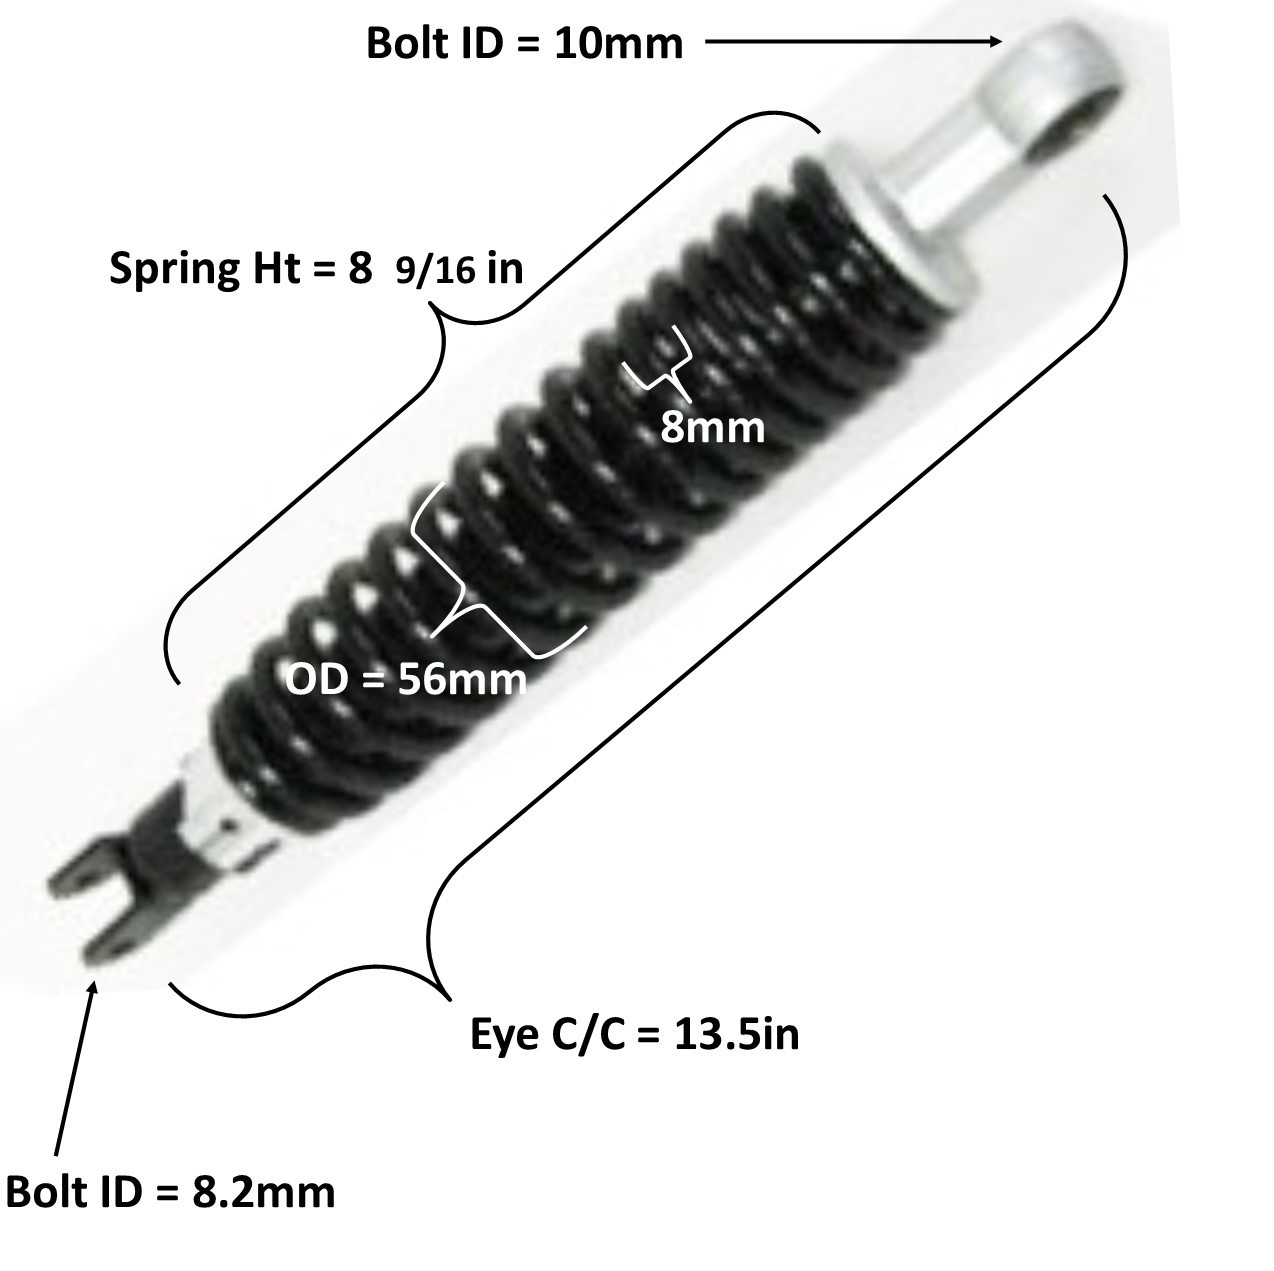 Rear Shock Eye c/c=13 1/2in Spring Ht=8 9/16in Spring OD=56mm Spring Thickness=8mm Fits E-Ton Sport 50, Tomos Nitro 50, 49cc Scooters Bolt ID Top=10 Bottom= 8.2mm - Click Image to Close